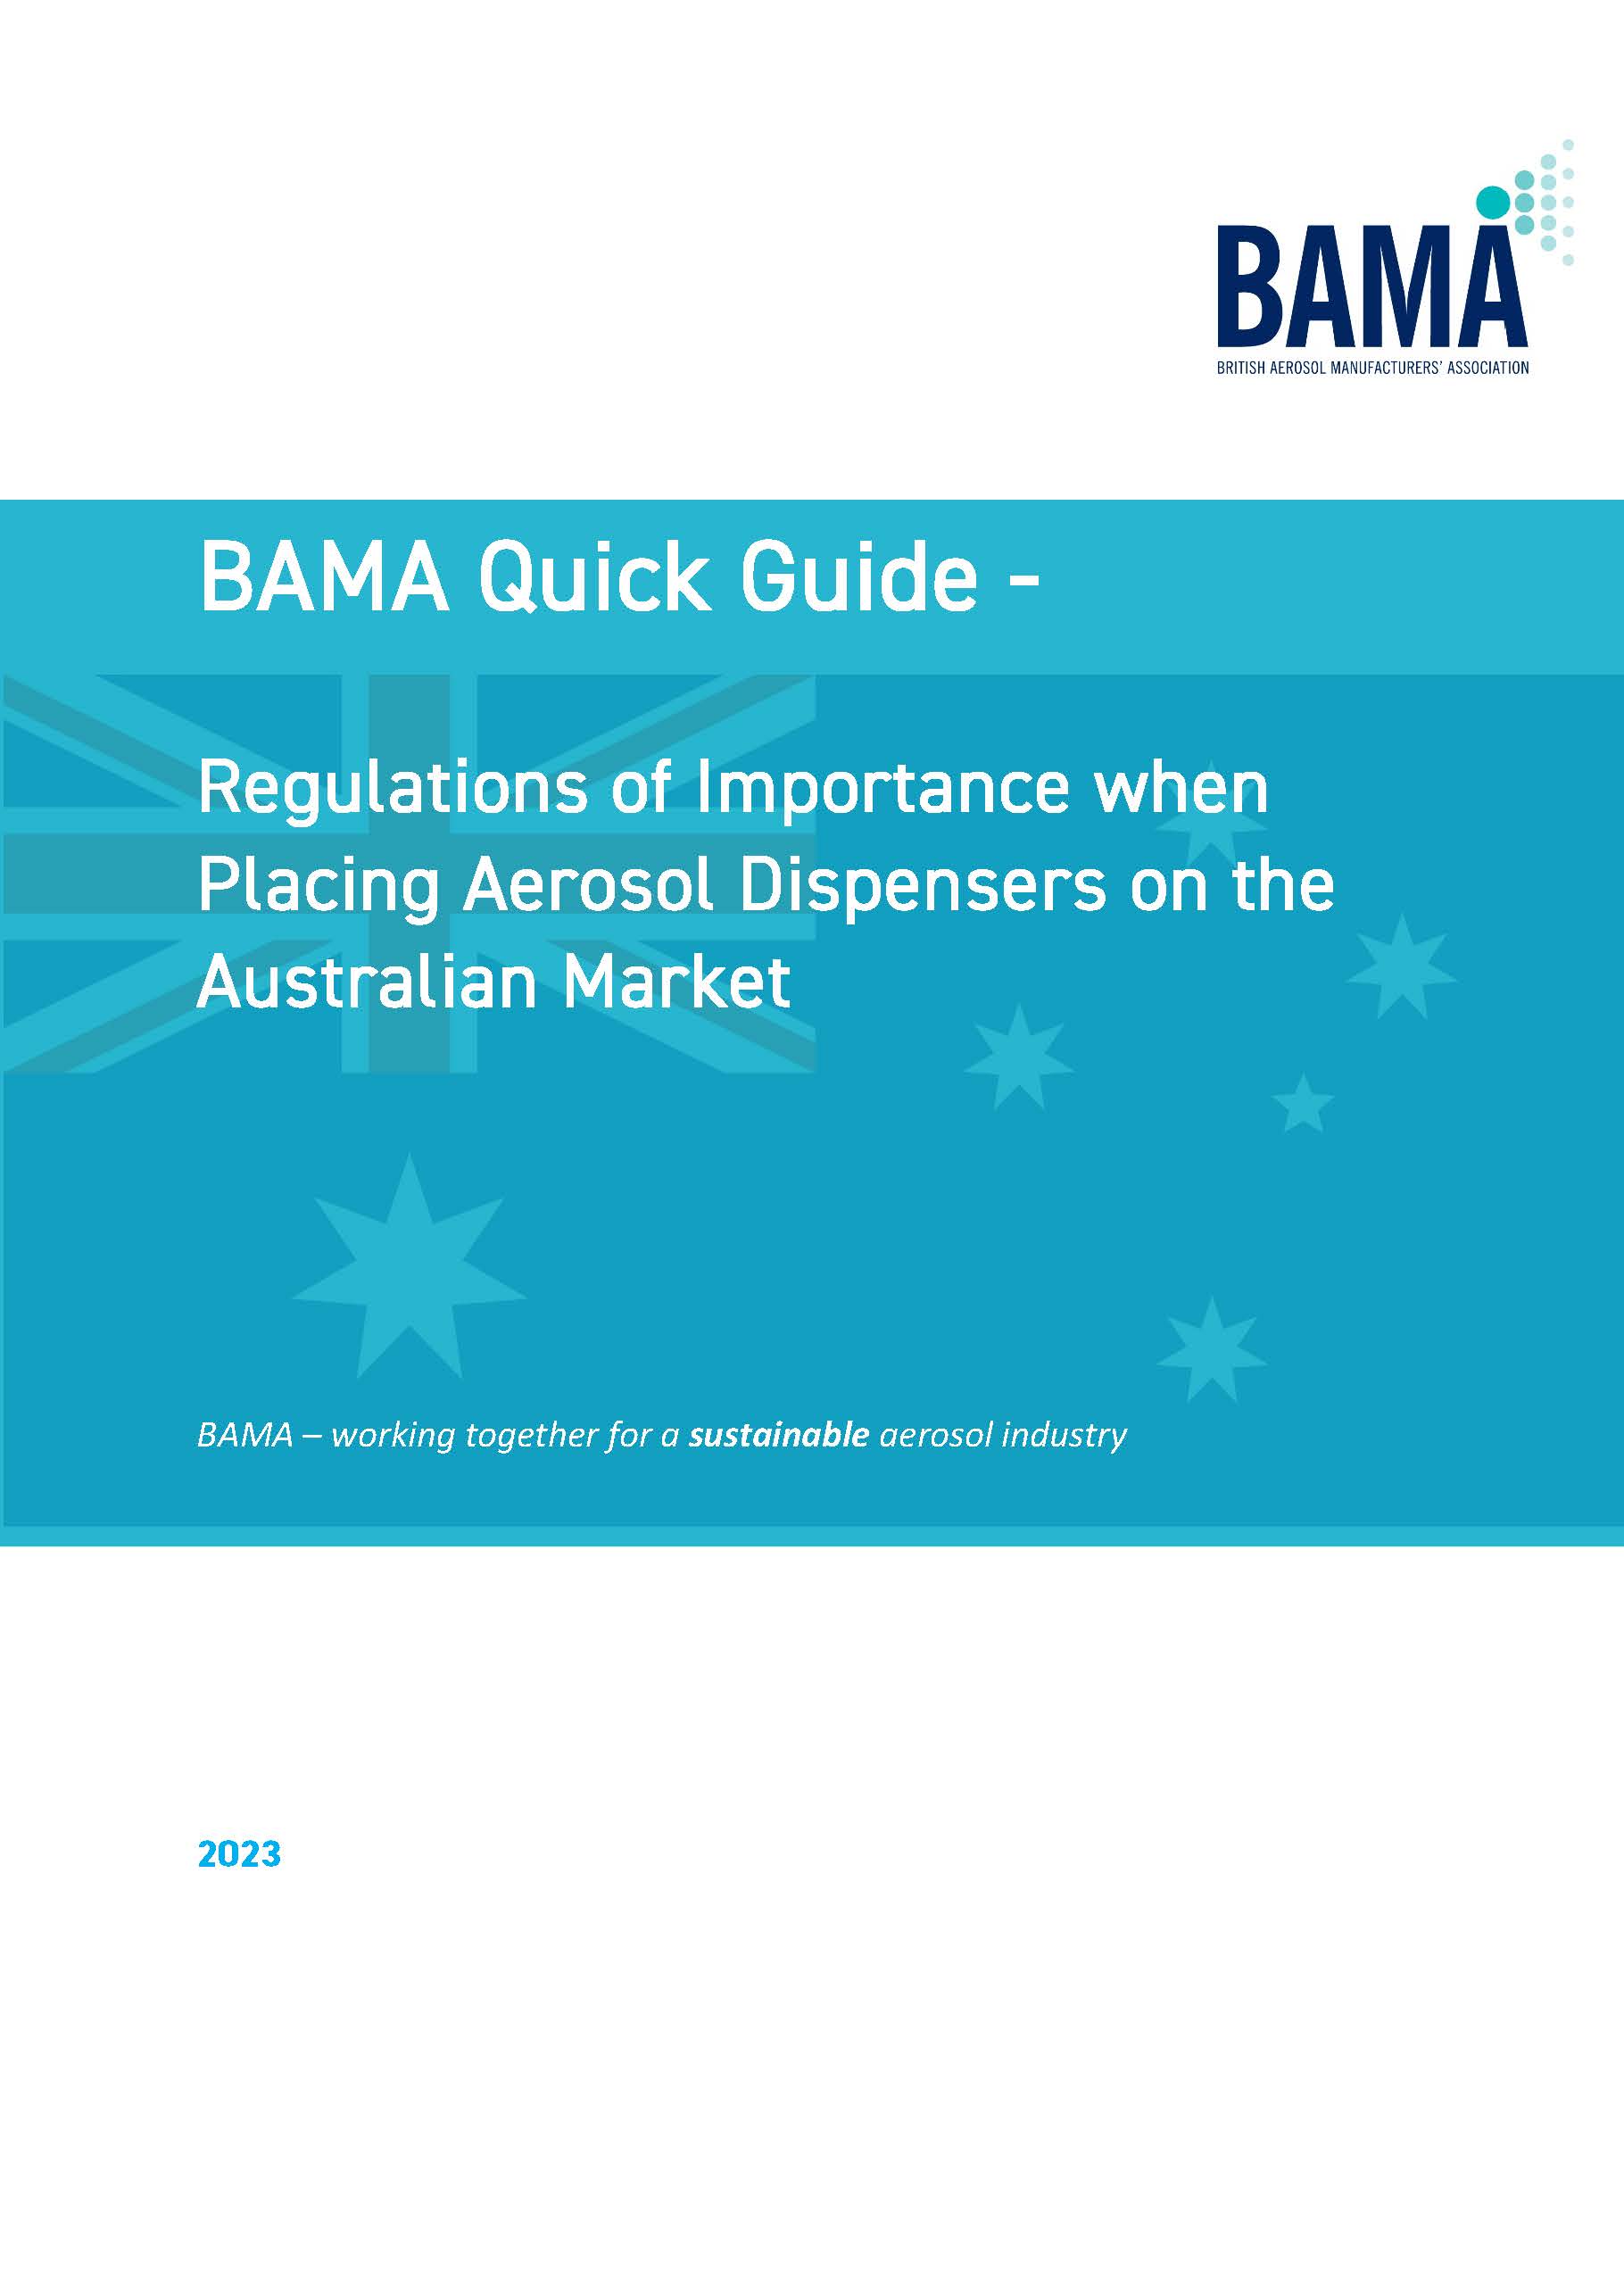 The BAMA Quick Guide to Regulations of Importance when Placing an Aerosol on the Australian Market